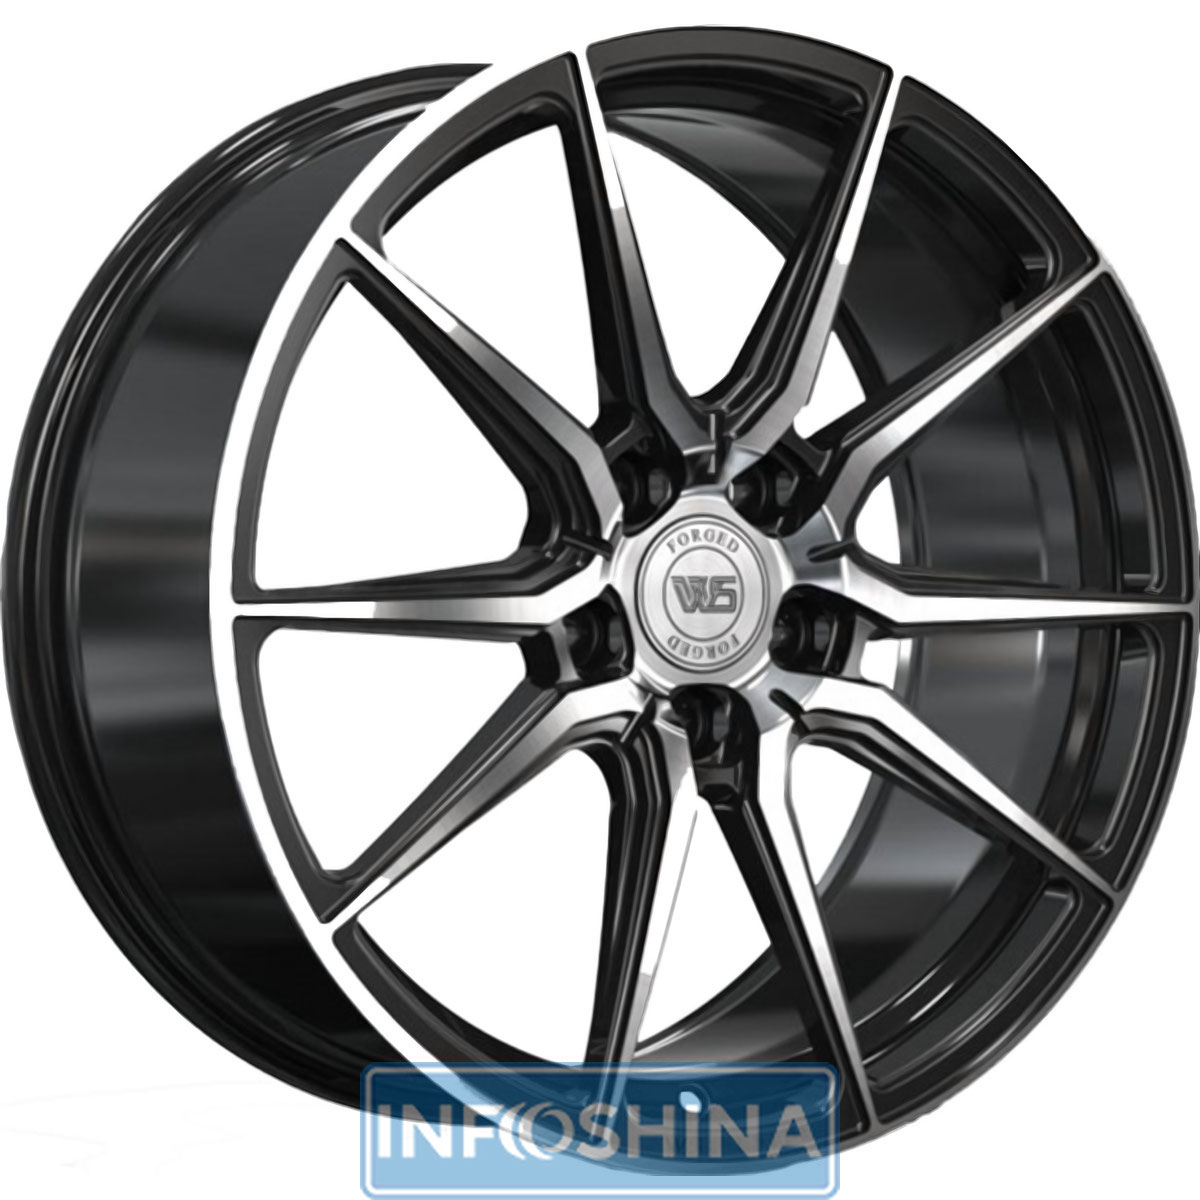 Купить диски WS Forged WS2104 Gloss Black With Machined Face